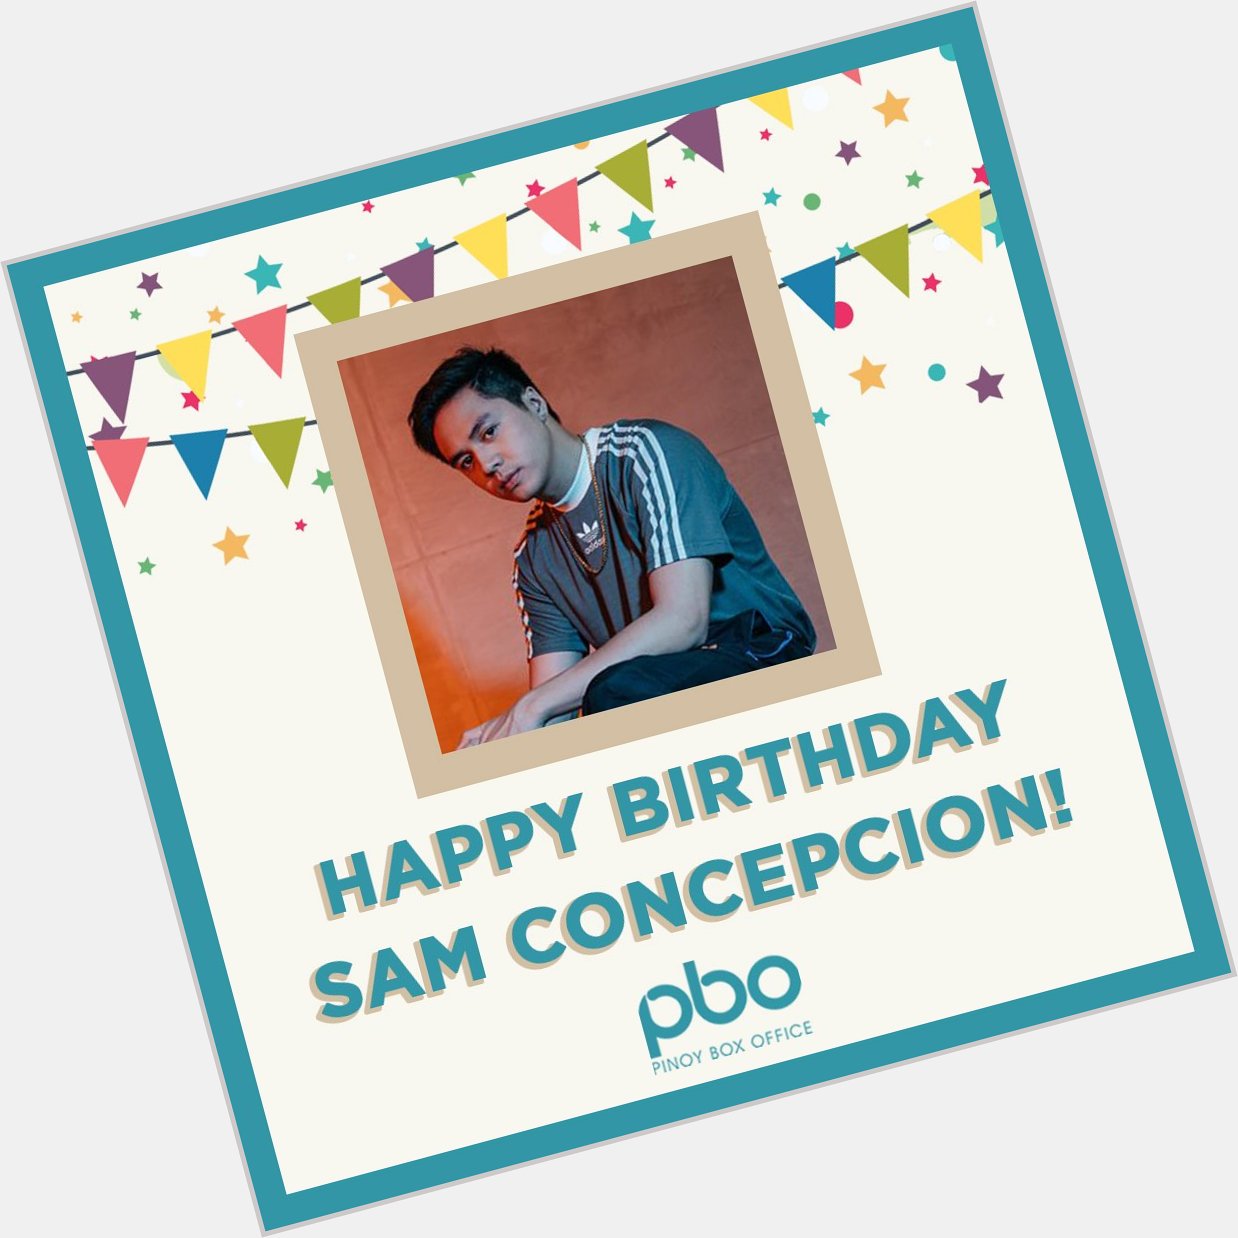 Happy Birthday Sam Concepcion! 
Wishing you a spectacular birthday and a blessed year ahead!  